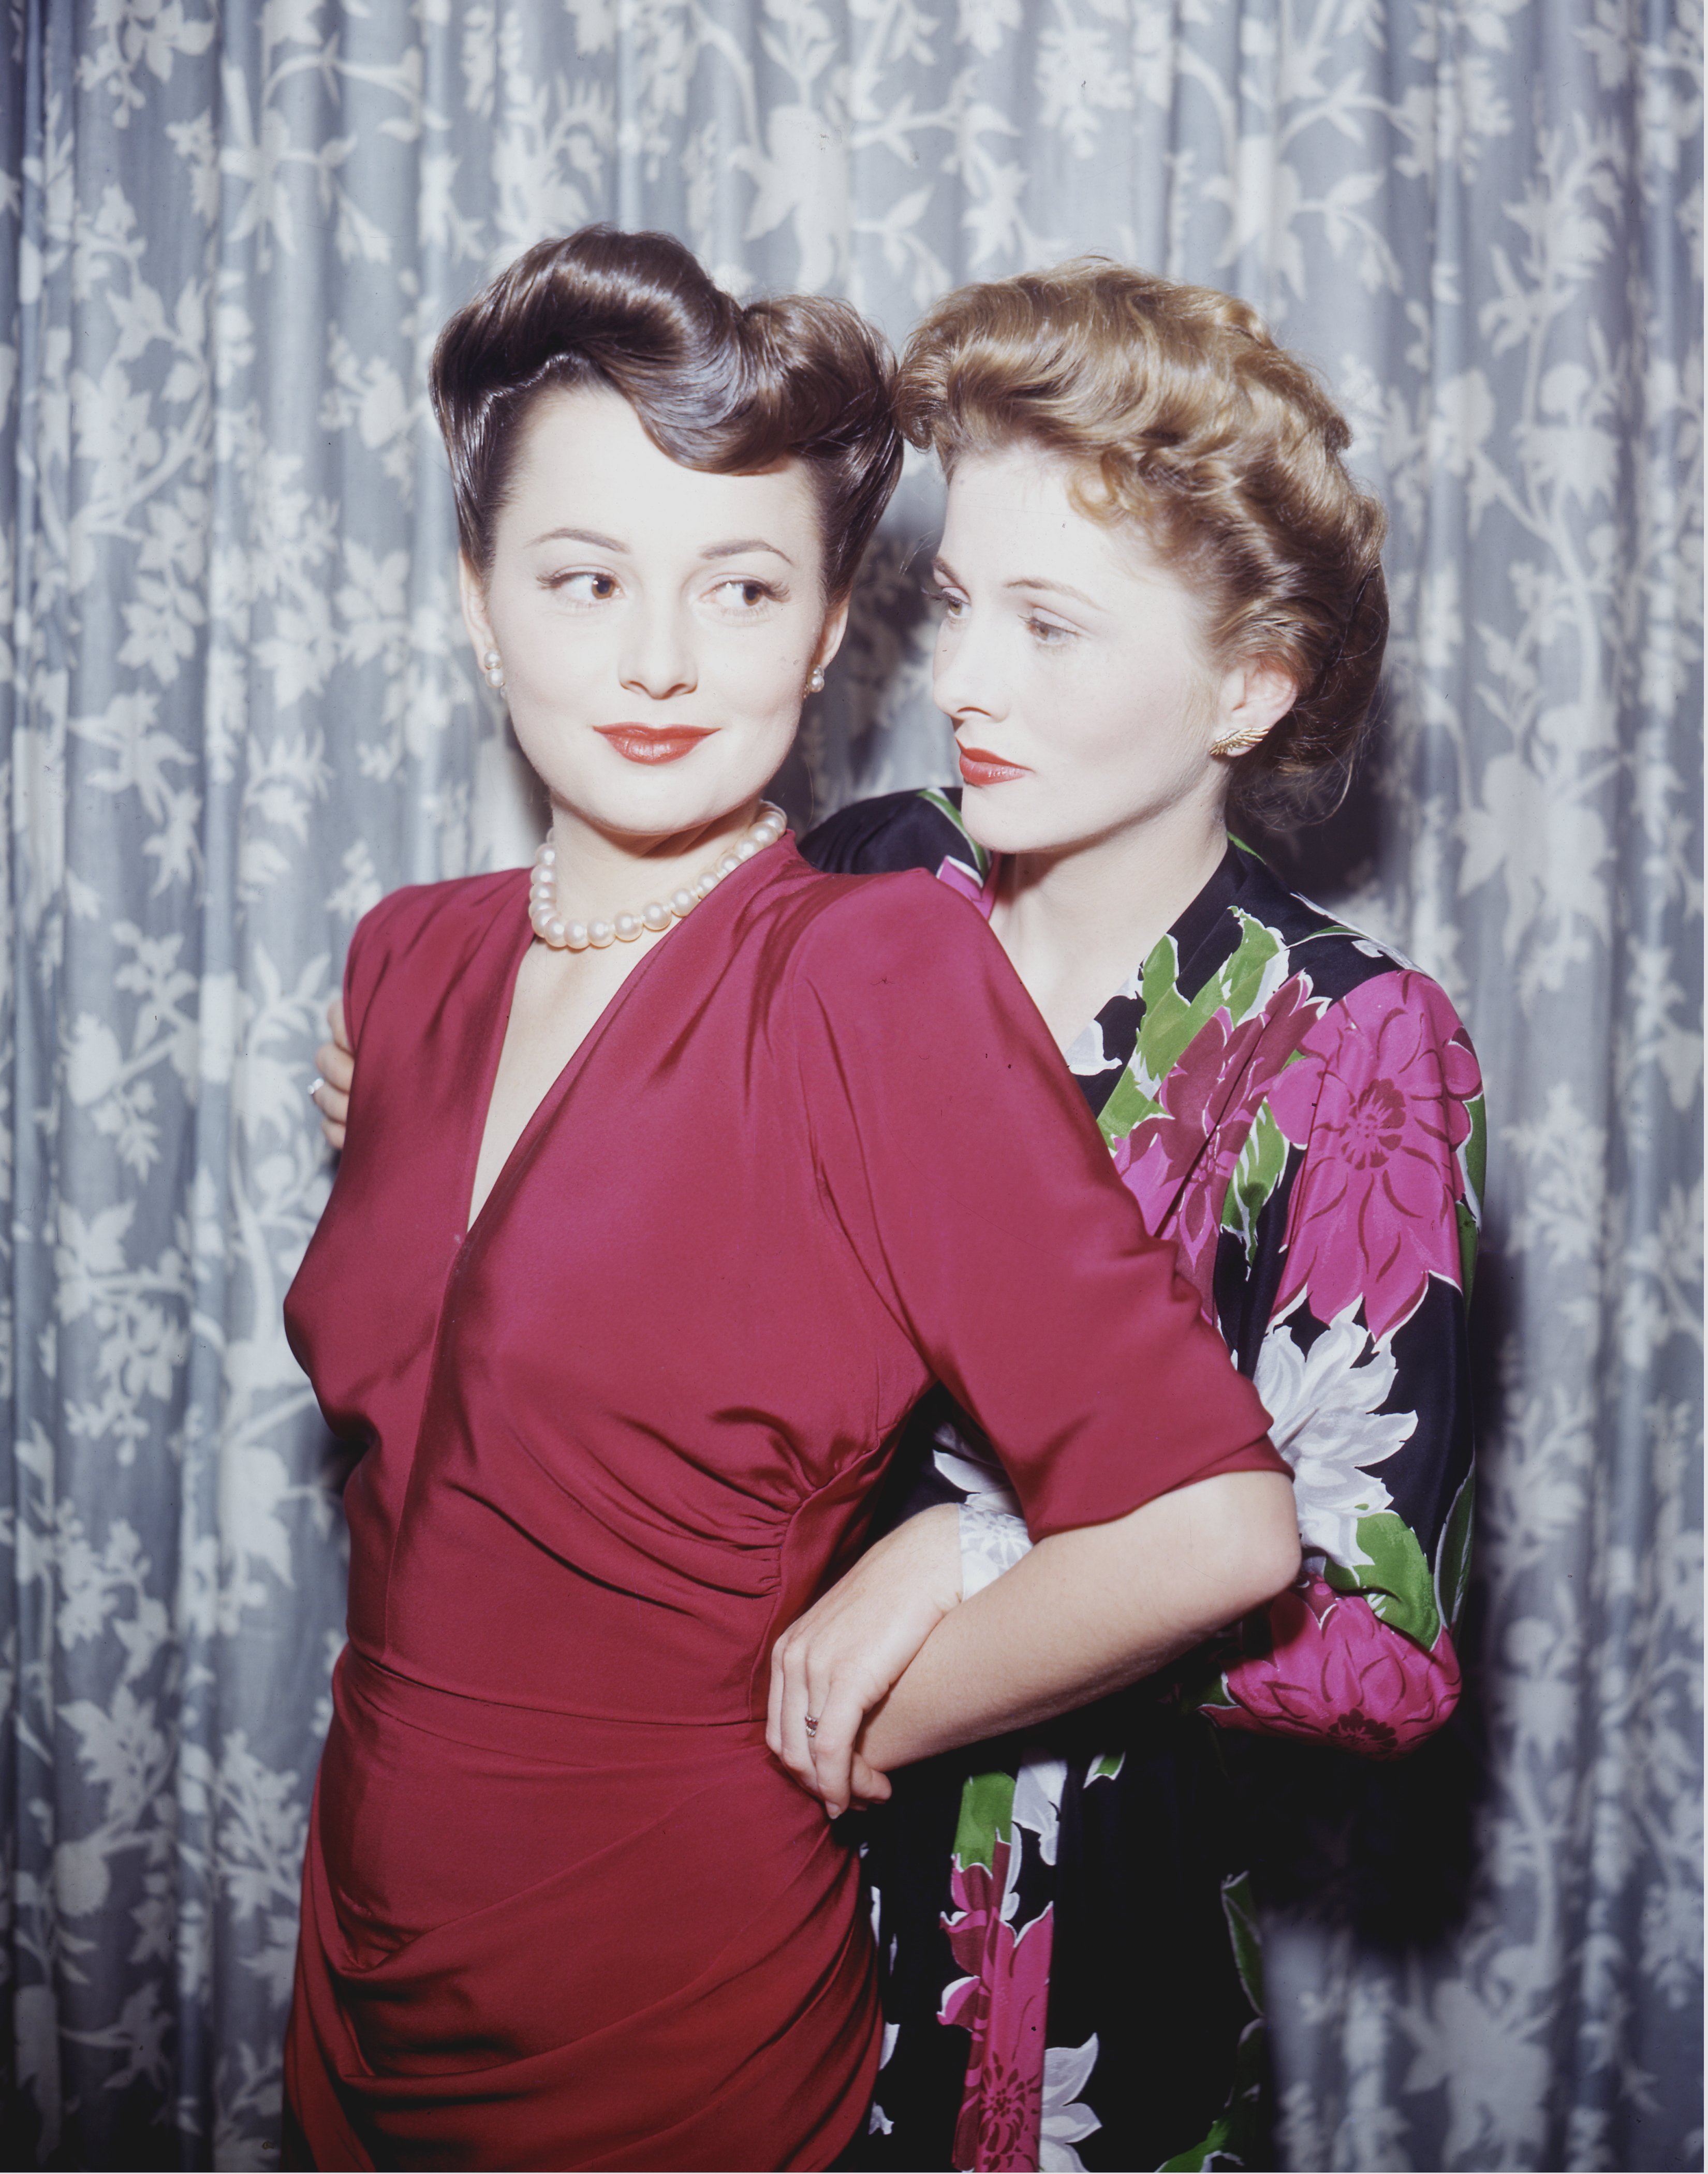 Actress Olivia de Havilland (left) with her sister, actress Joan Fontaine, circa 1945. | Photo: Getty Images